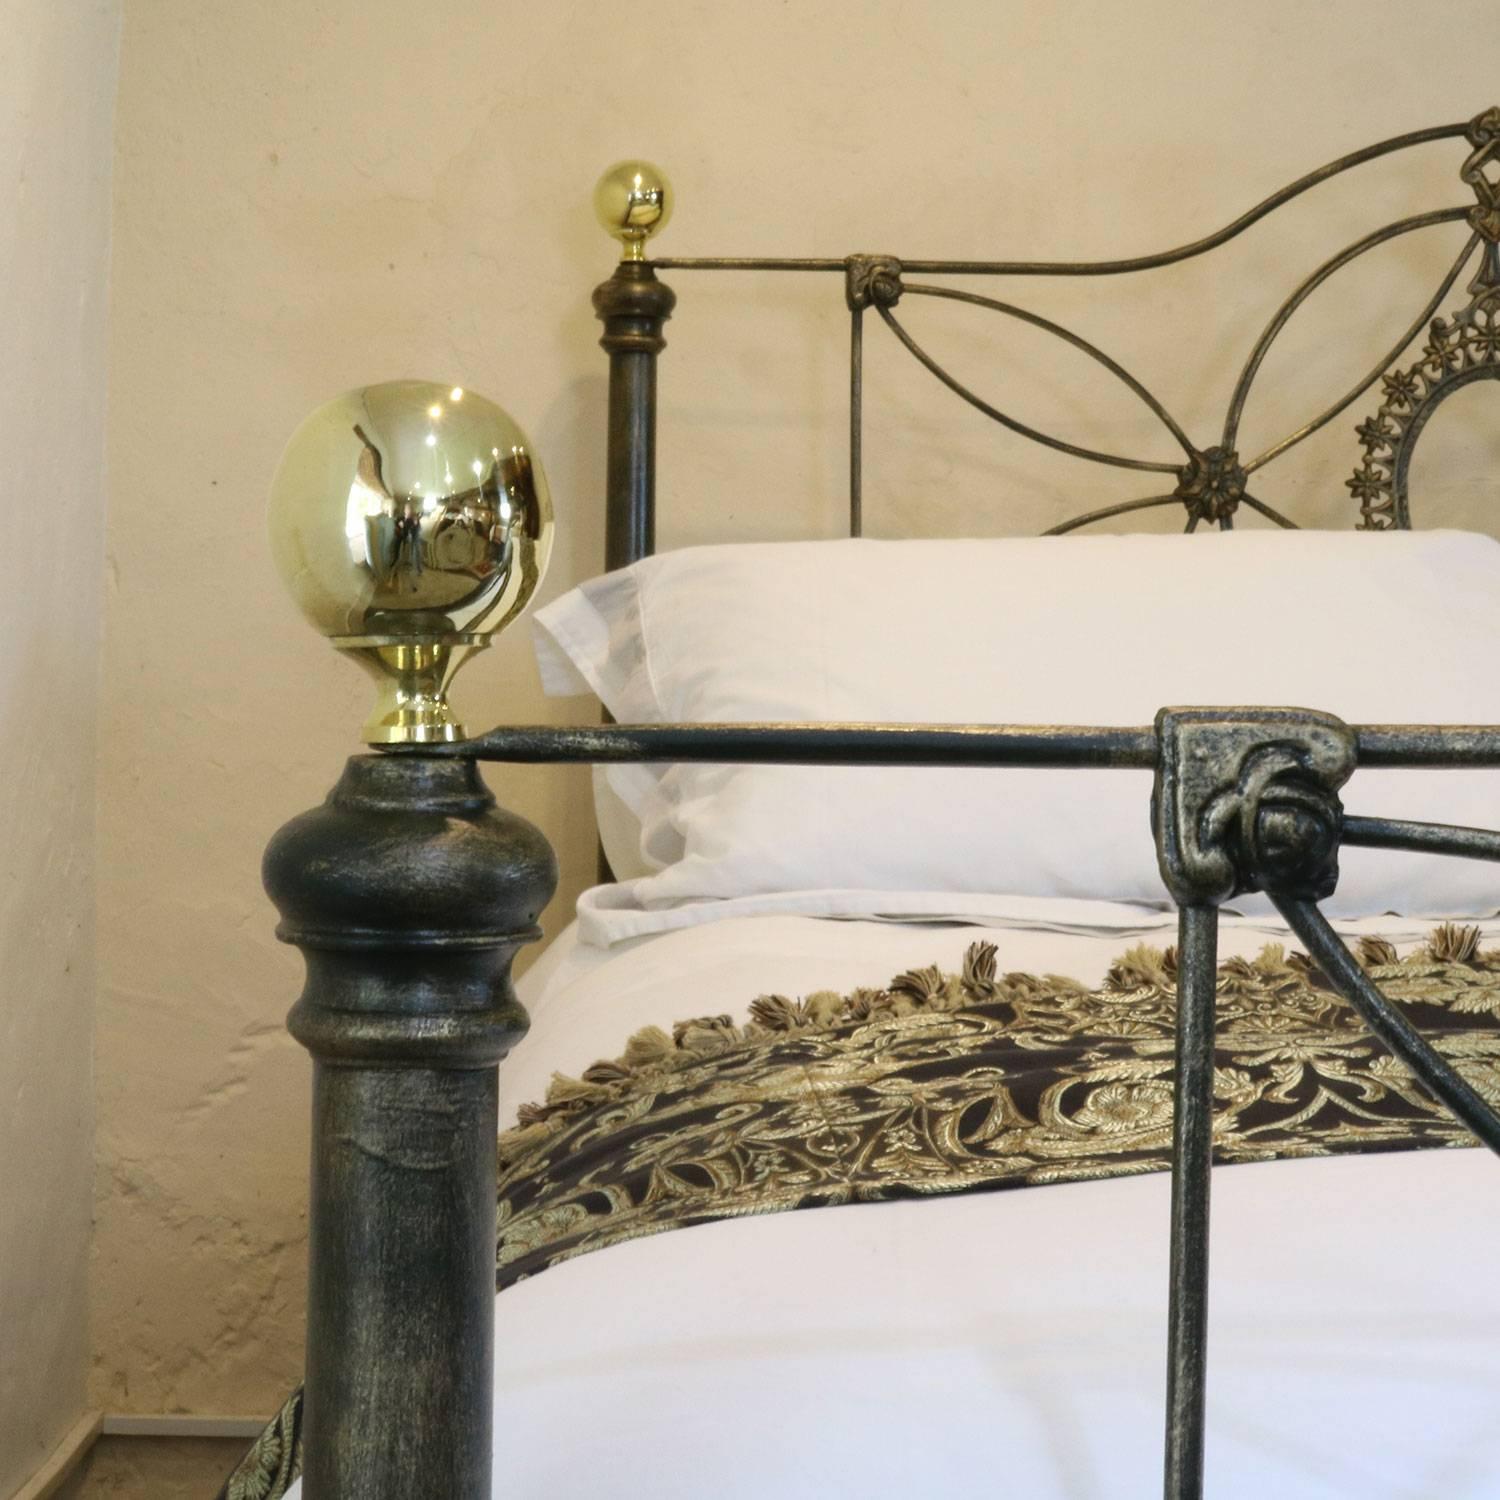 19th Century Cast Iron Bed finished in Green with Gold Highlighting MK118